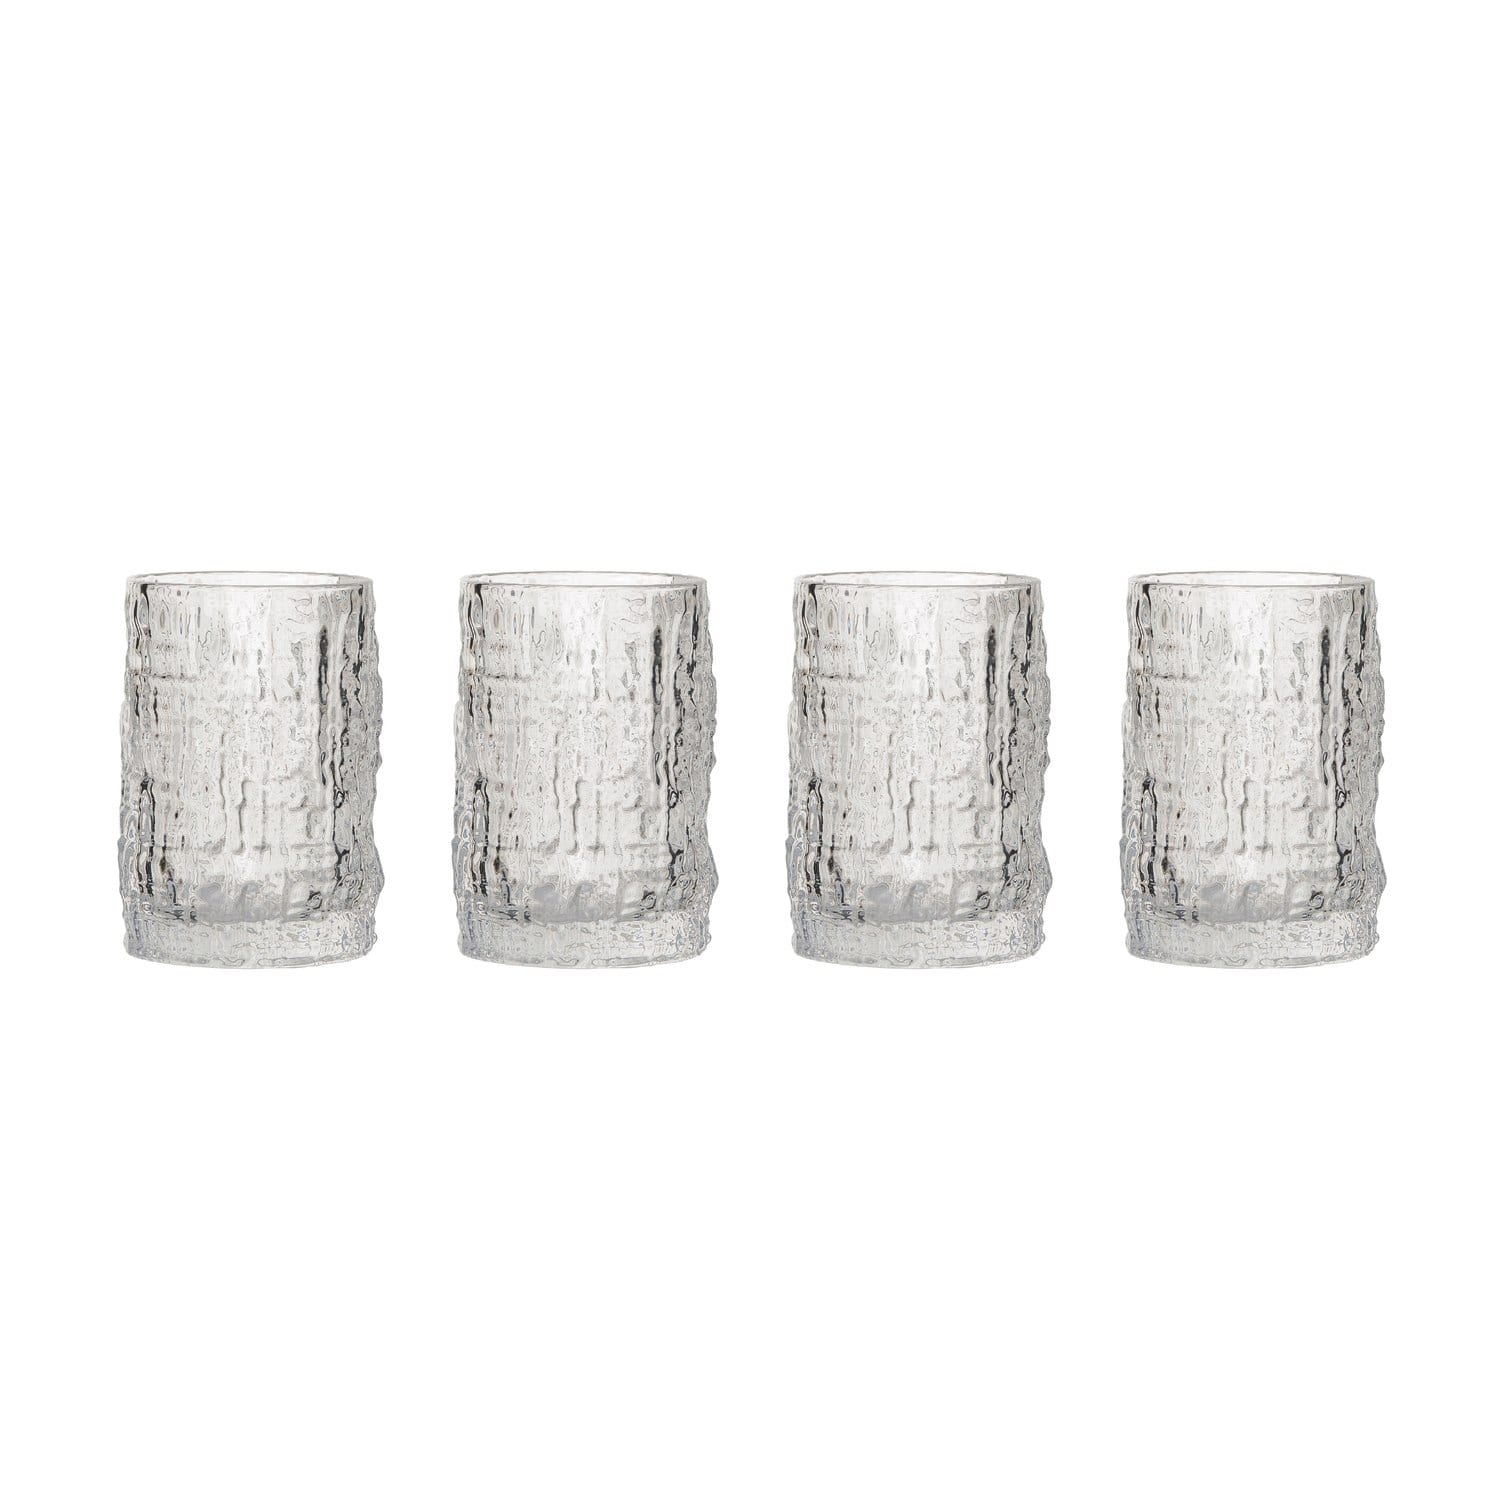 10oz. Clear Glass Embossed Design Drinking Glasses, 4ct.